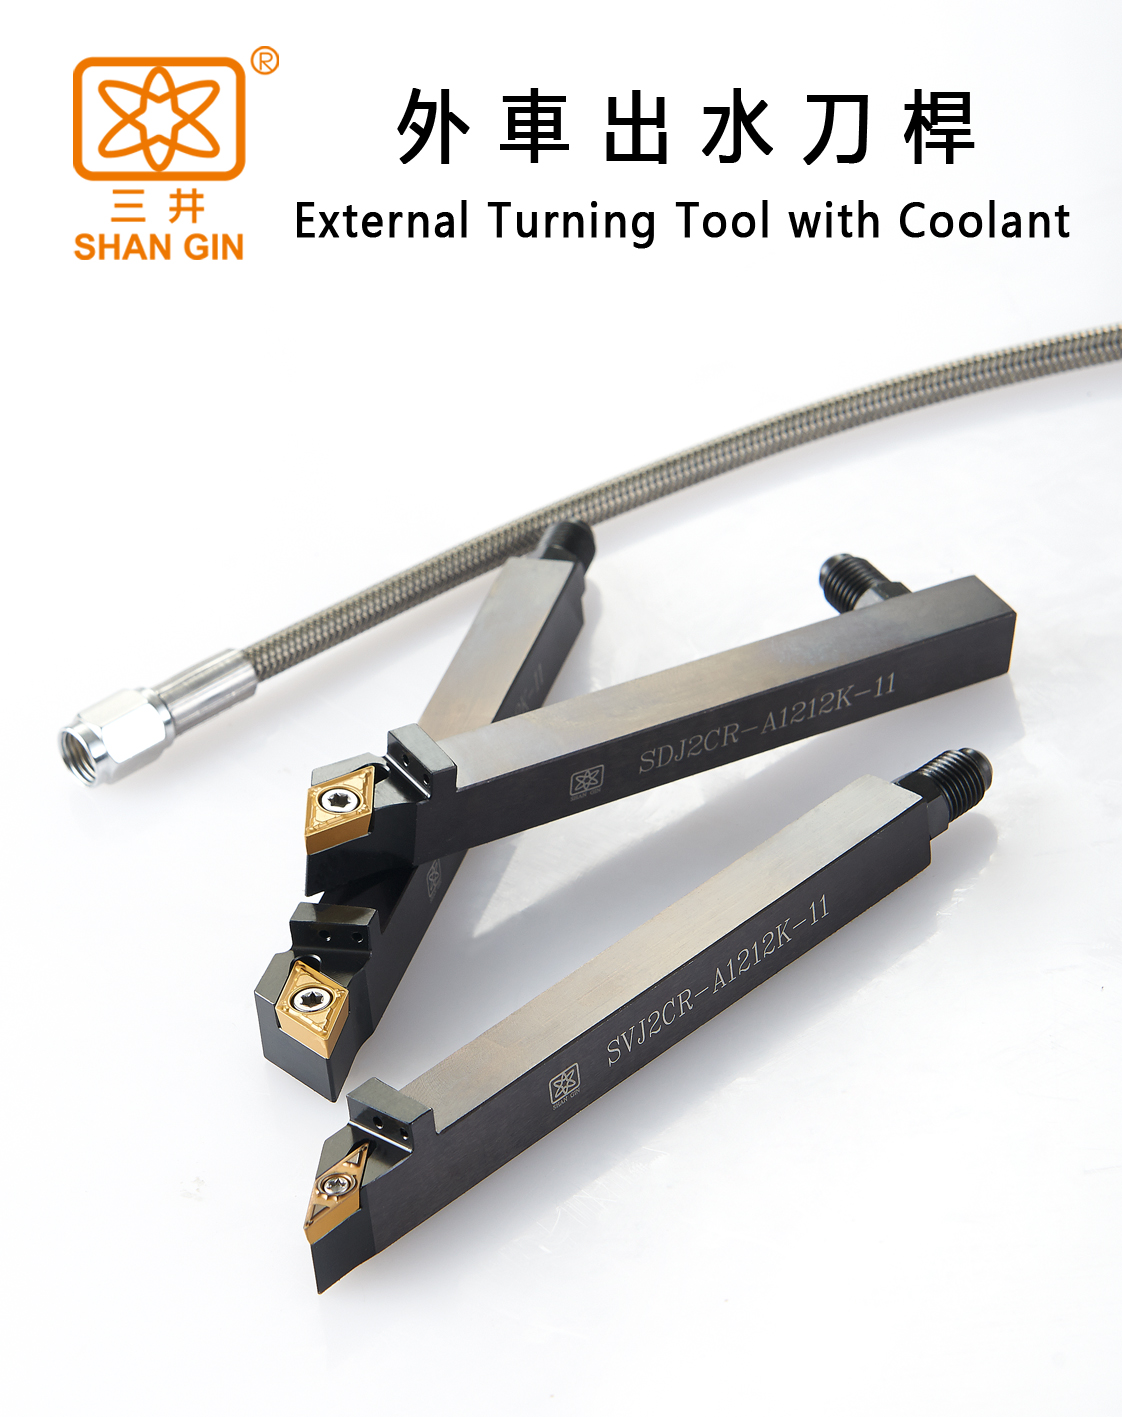 Catalog|External Turning Tool  with Coolant